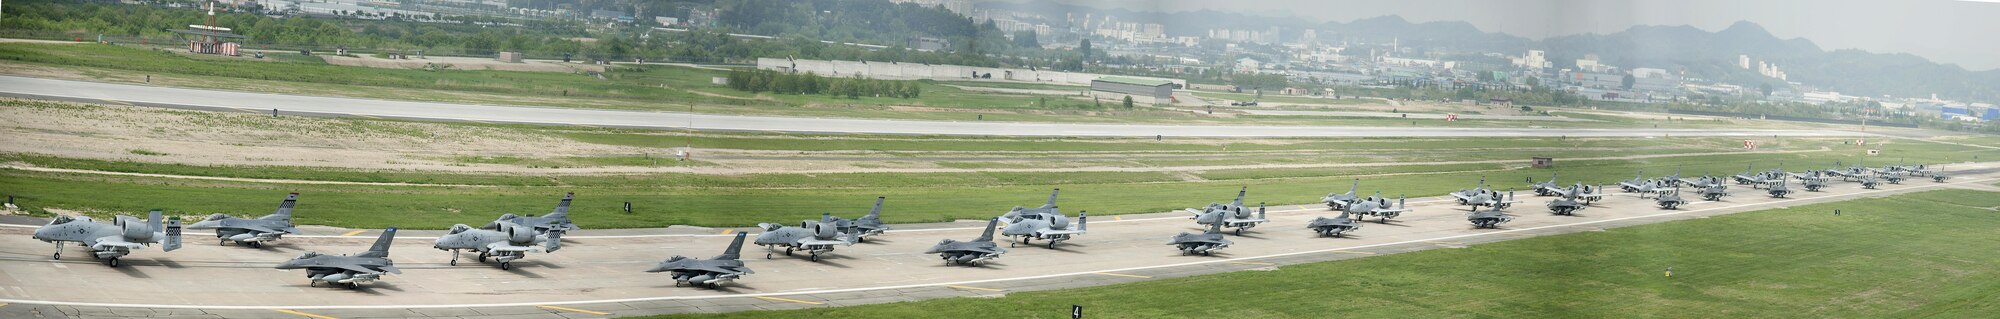 A-10 Thunderbolt II and F-16 Fighting Falcon fighter aircraft perform an 'Elephant Walk' on the runway this week during Exercise Beverly Herd 16-01 at Osan Air Base, Republic of Korea. The Elephant Walk was a demonstration of U.S. Air Force capabilities and strength and showcases the wing's ability to generate combat airpower in an expedient manner in order to respond to simulated contingency operations. The A-10 Thunderbolt II aircraft are the 25th Fighter Squadron "Draggins" and the F-16 Fighting Falcon aircraft are the 36th Fighter Squadron "Friends" from the 51st Fighter Wing, Osan AB, ROK; the additional F-16 aircraft are the 179th Fighter Squadron "Bulldogs" from the 148th Fighter Wing out of Duluth Air National Guard Base, Minnesota. .(U.S. Air Force photo by Staff Sgt. Jonathan Steffen/Released)